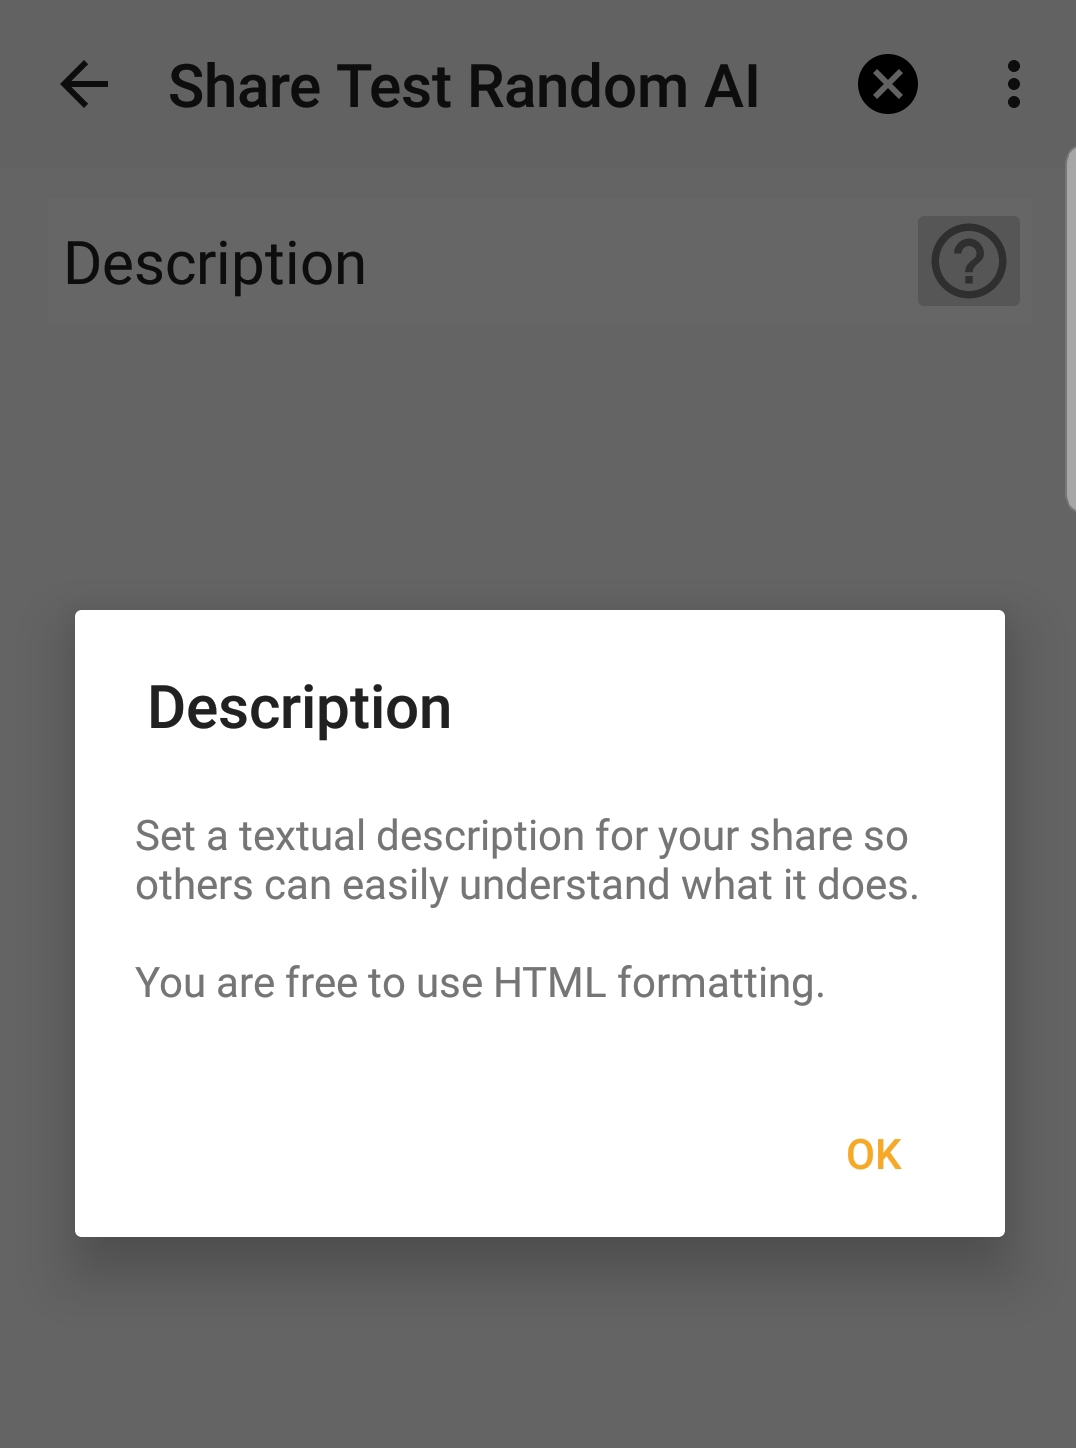 tasker android